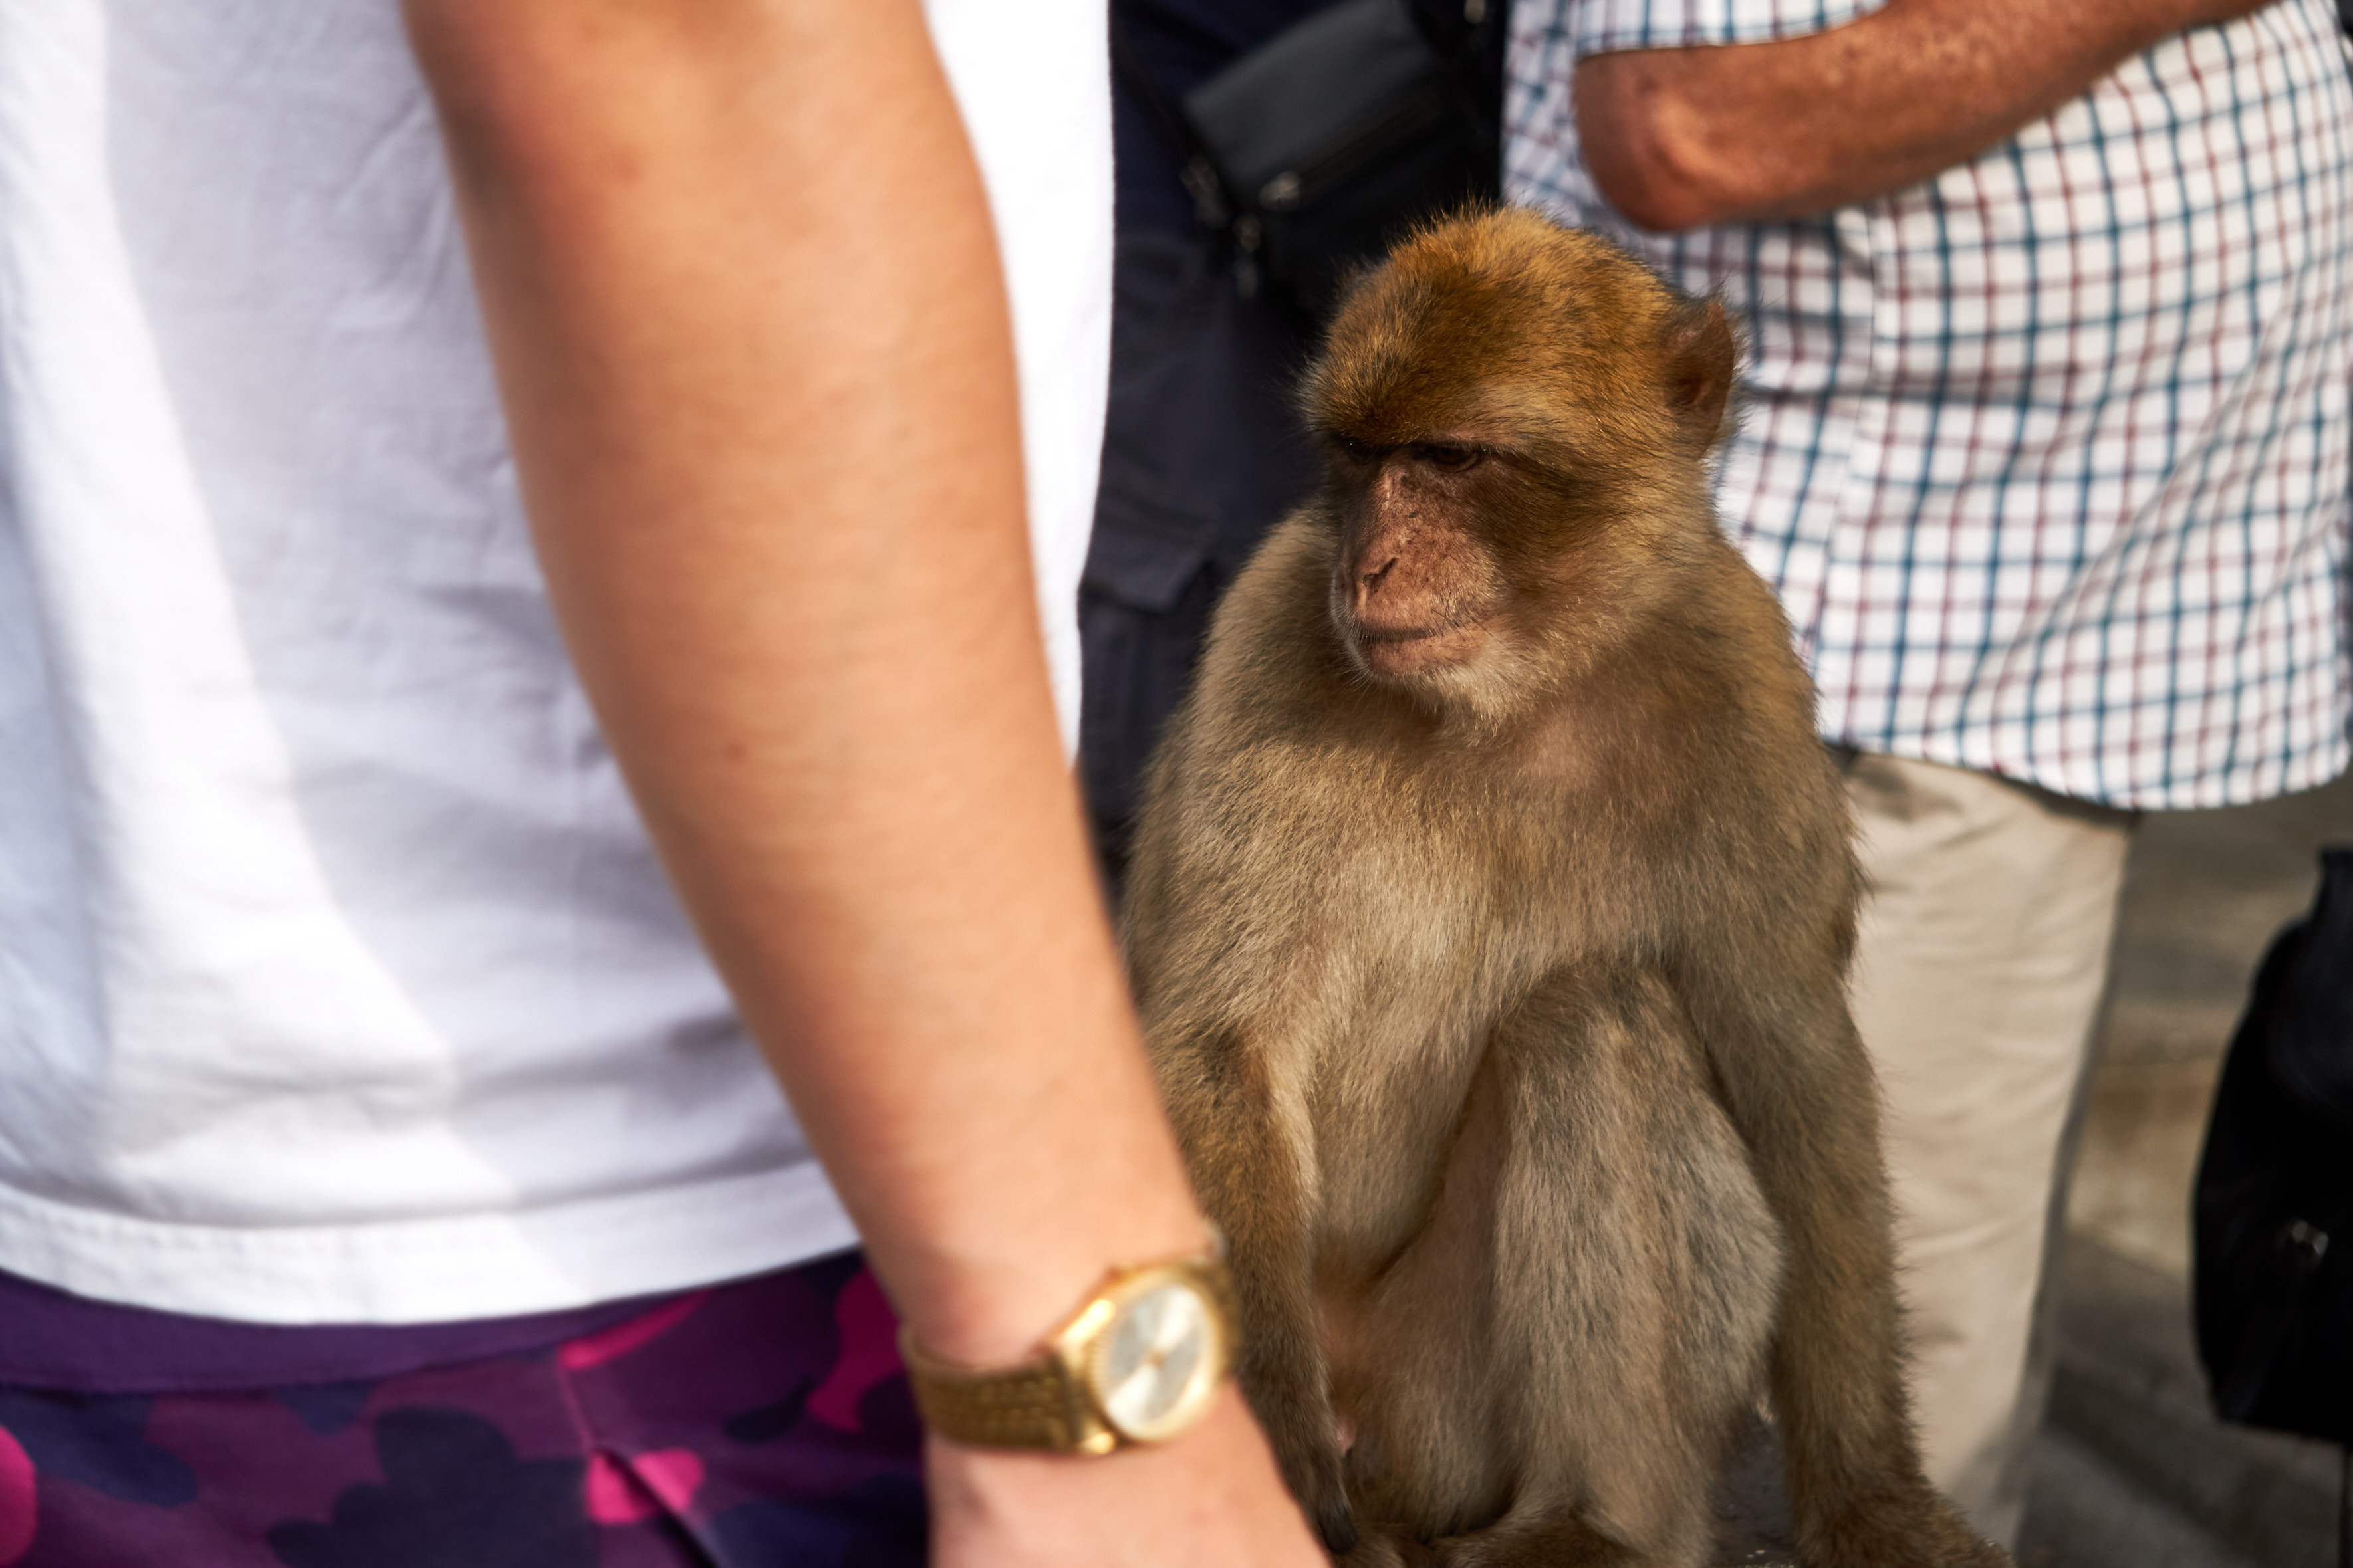 A monkey, casually planing to steal this guy's watch